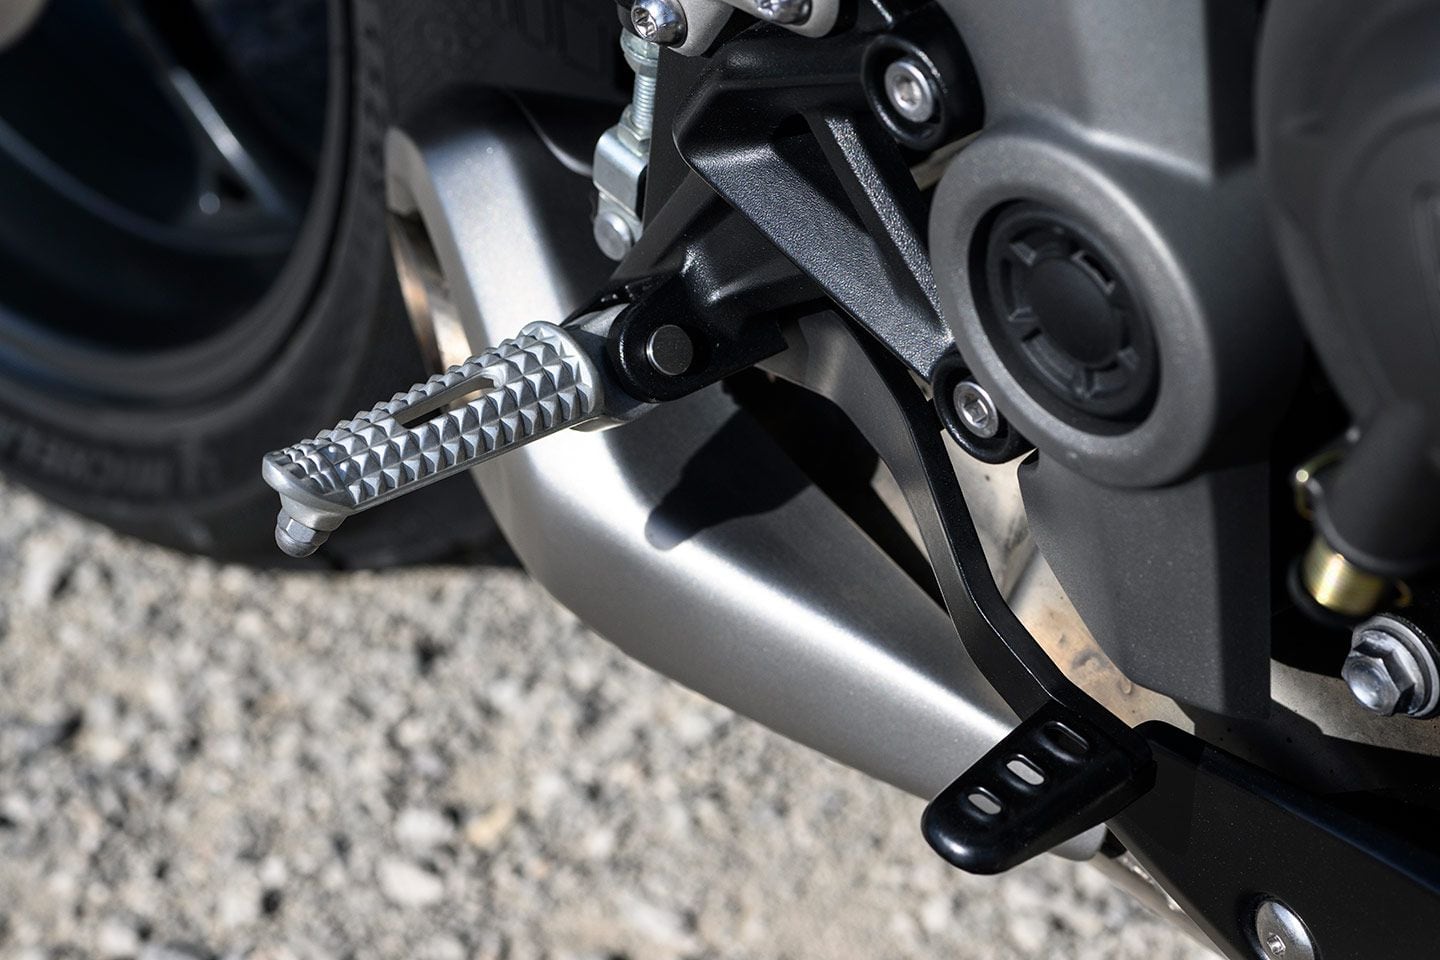 The footpegs are set at a sporty but not torturous level.